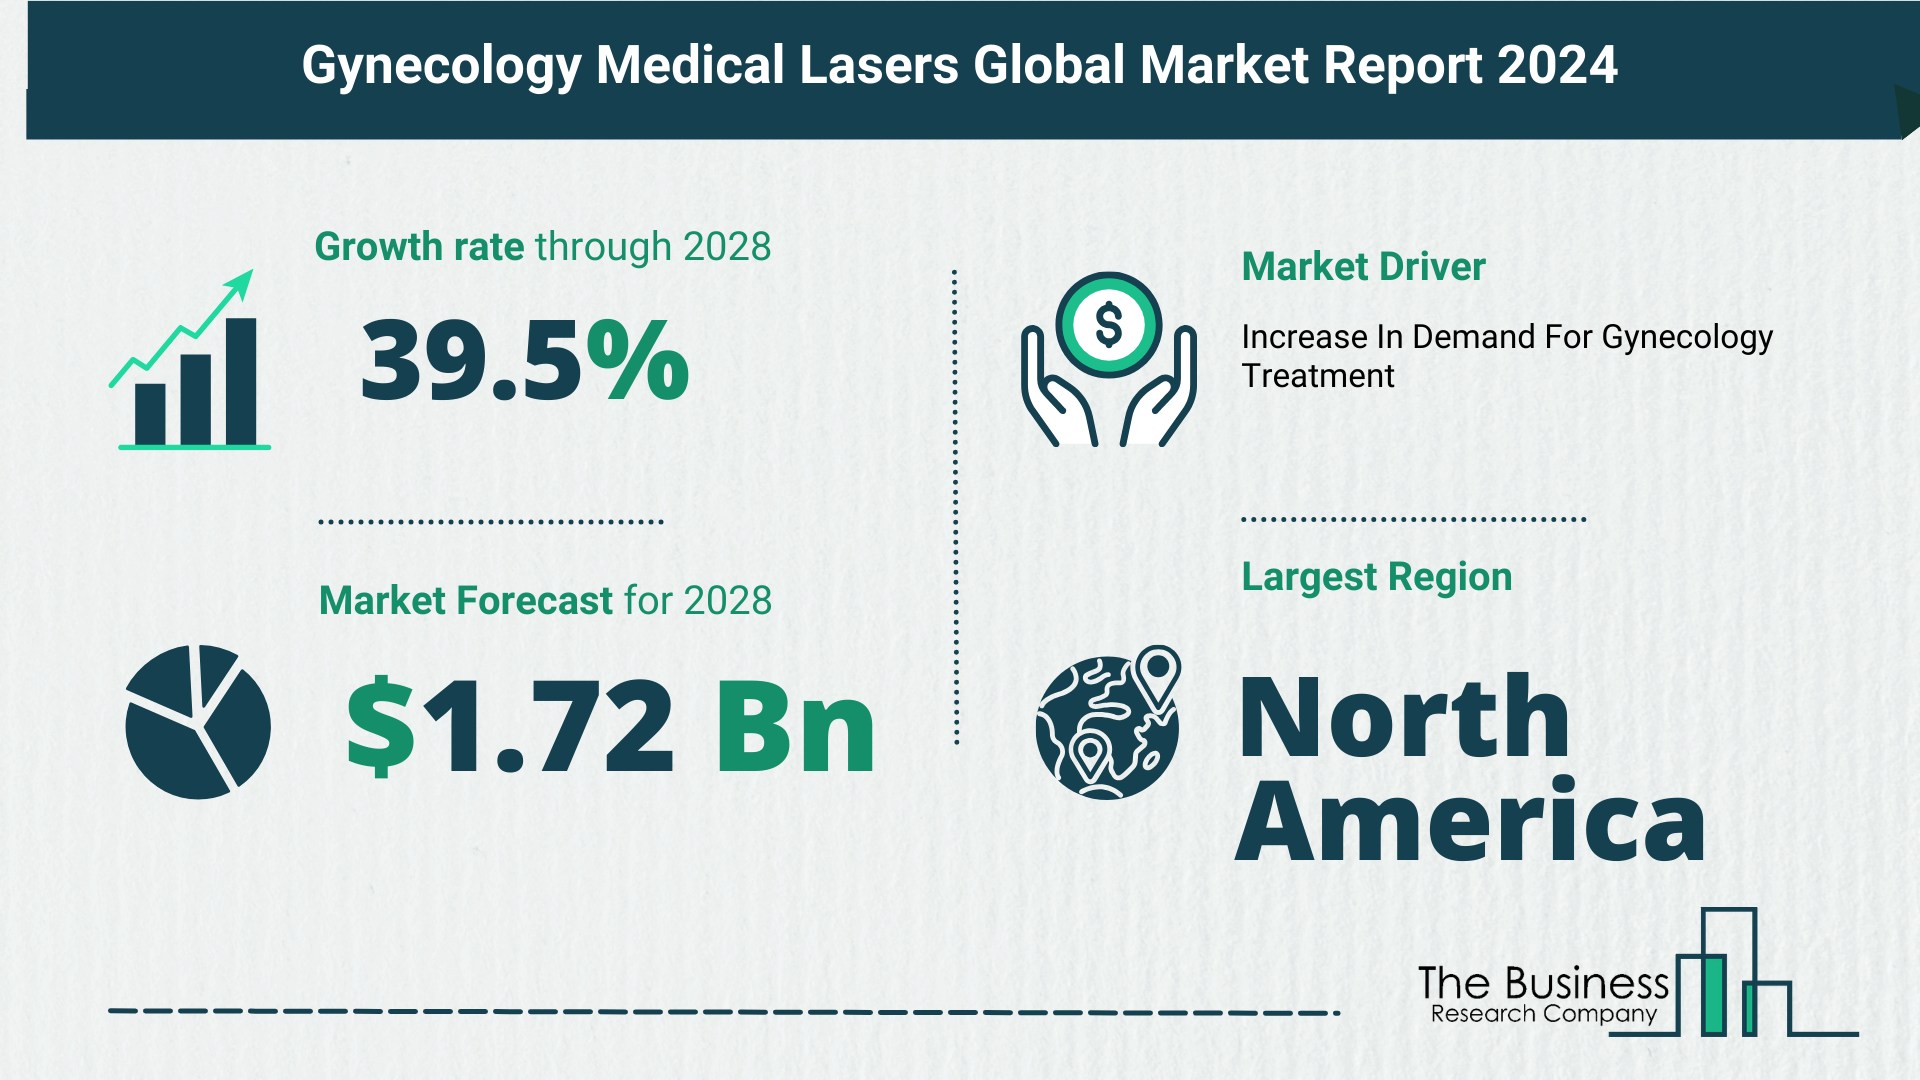 Key Insights On The Gynecology Medical Lasers Market 2024 – Size, Driver, And Major Players